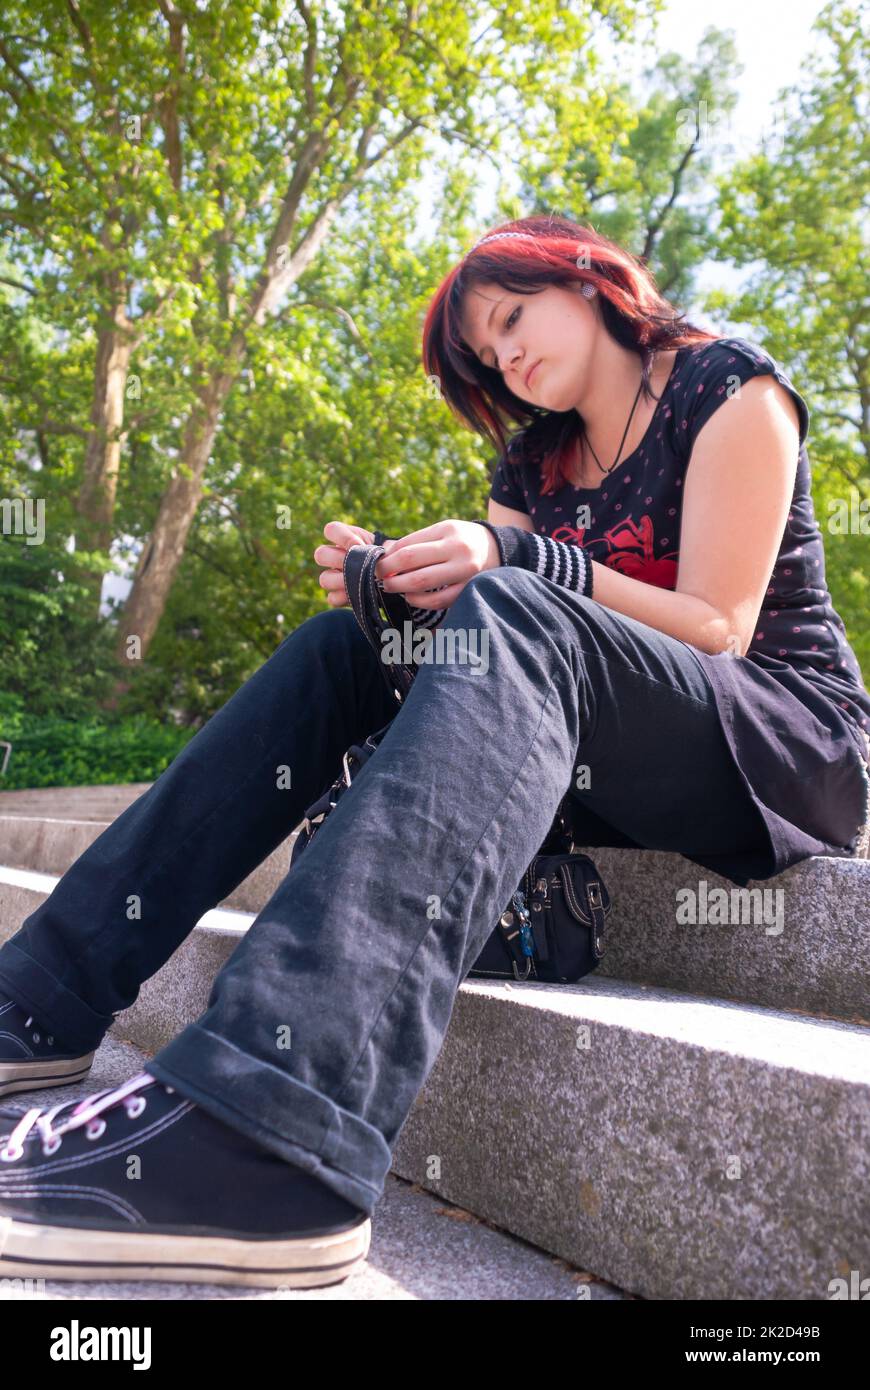 Punk emo girl, young adult with black red hair Stock Photo